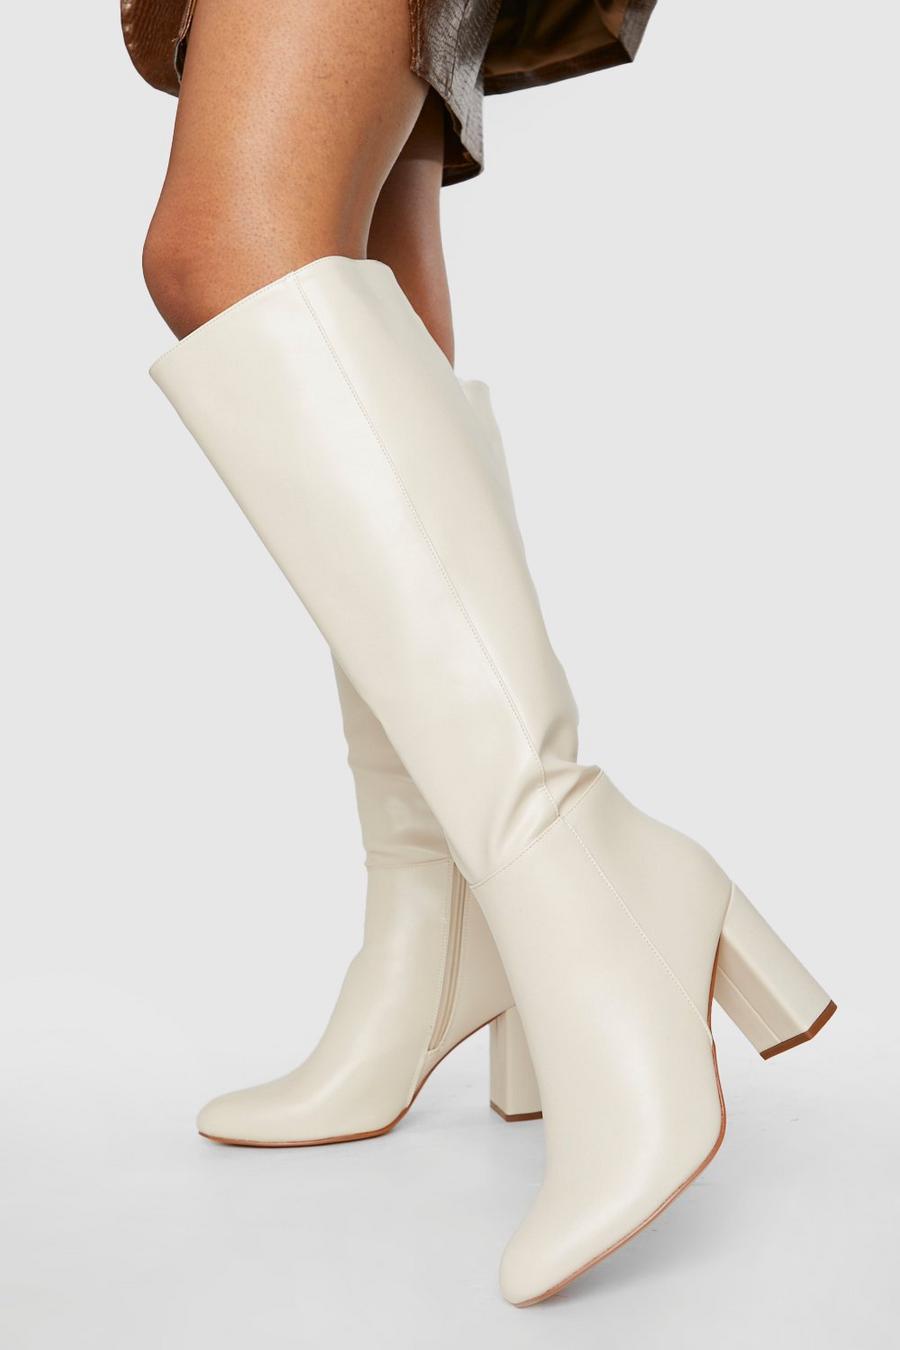 Ecru white Wide Fit Block Heel Knee High Pull On Boots